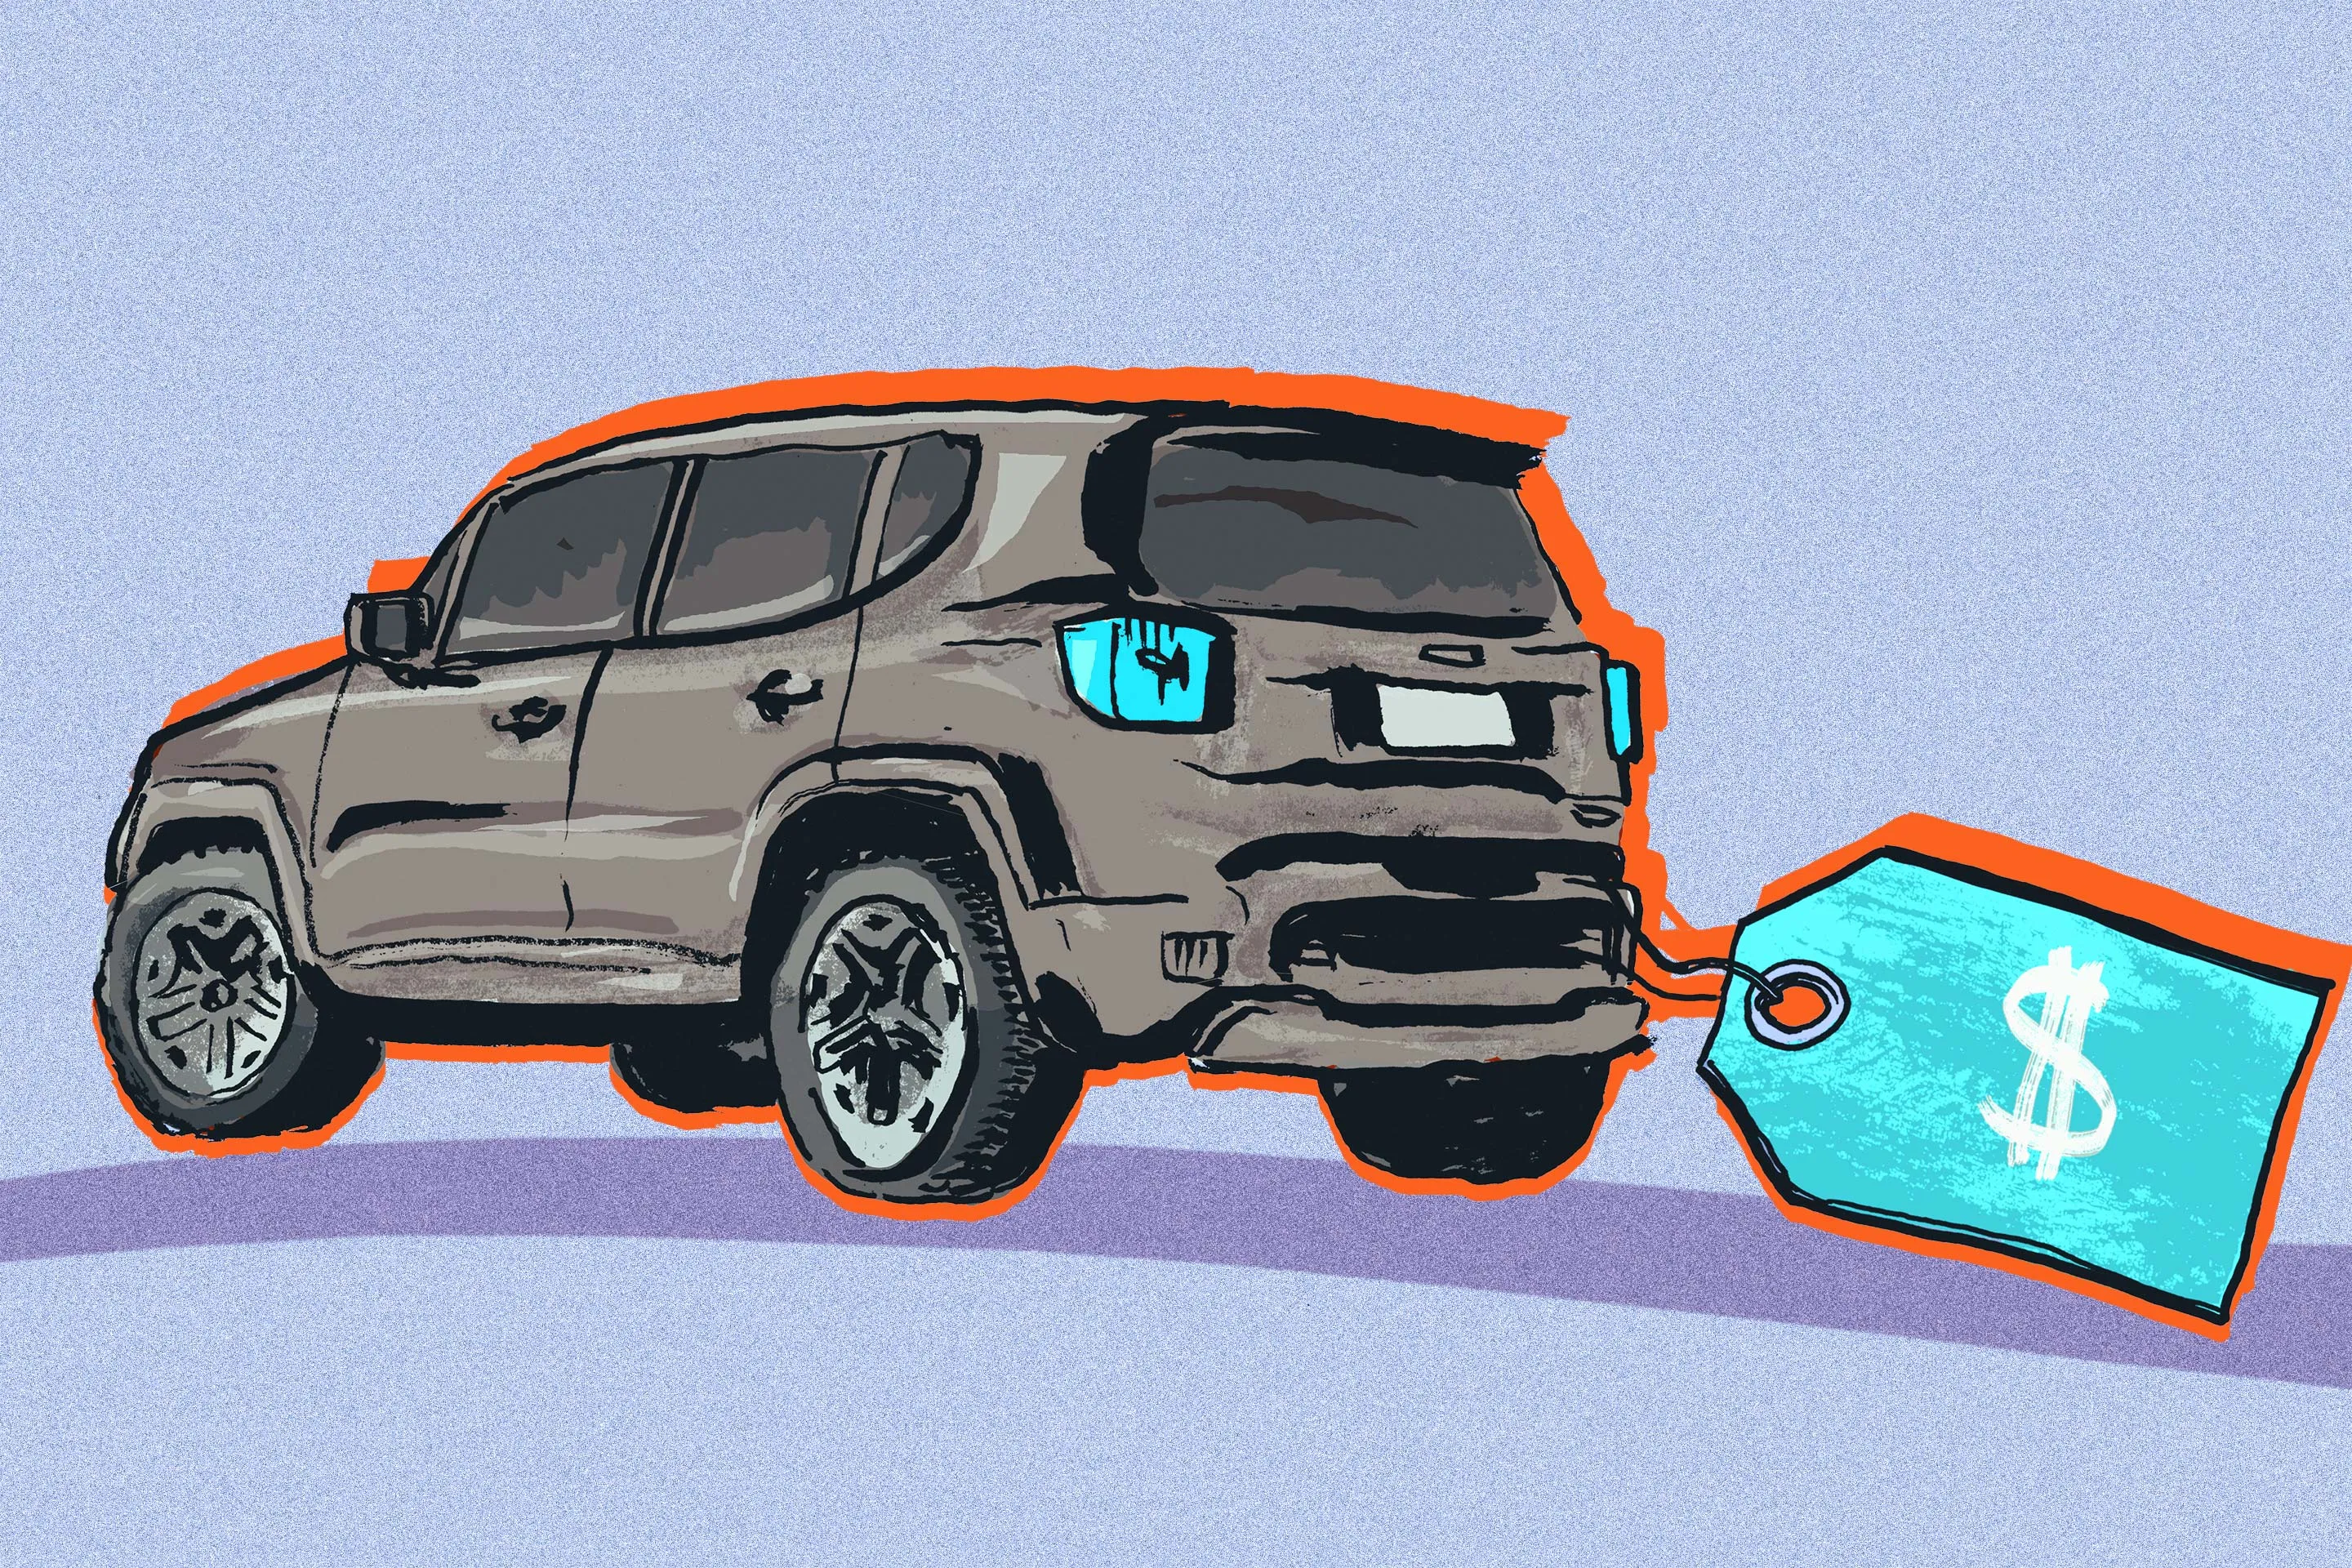 As Used Car Prices Fall, Here’s How to Get the Best Deal